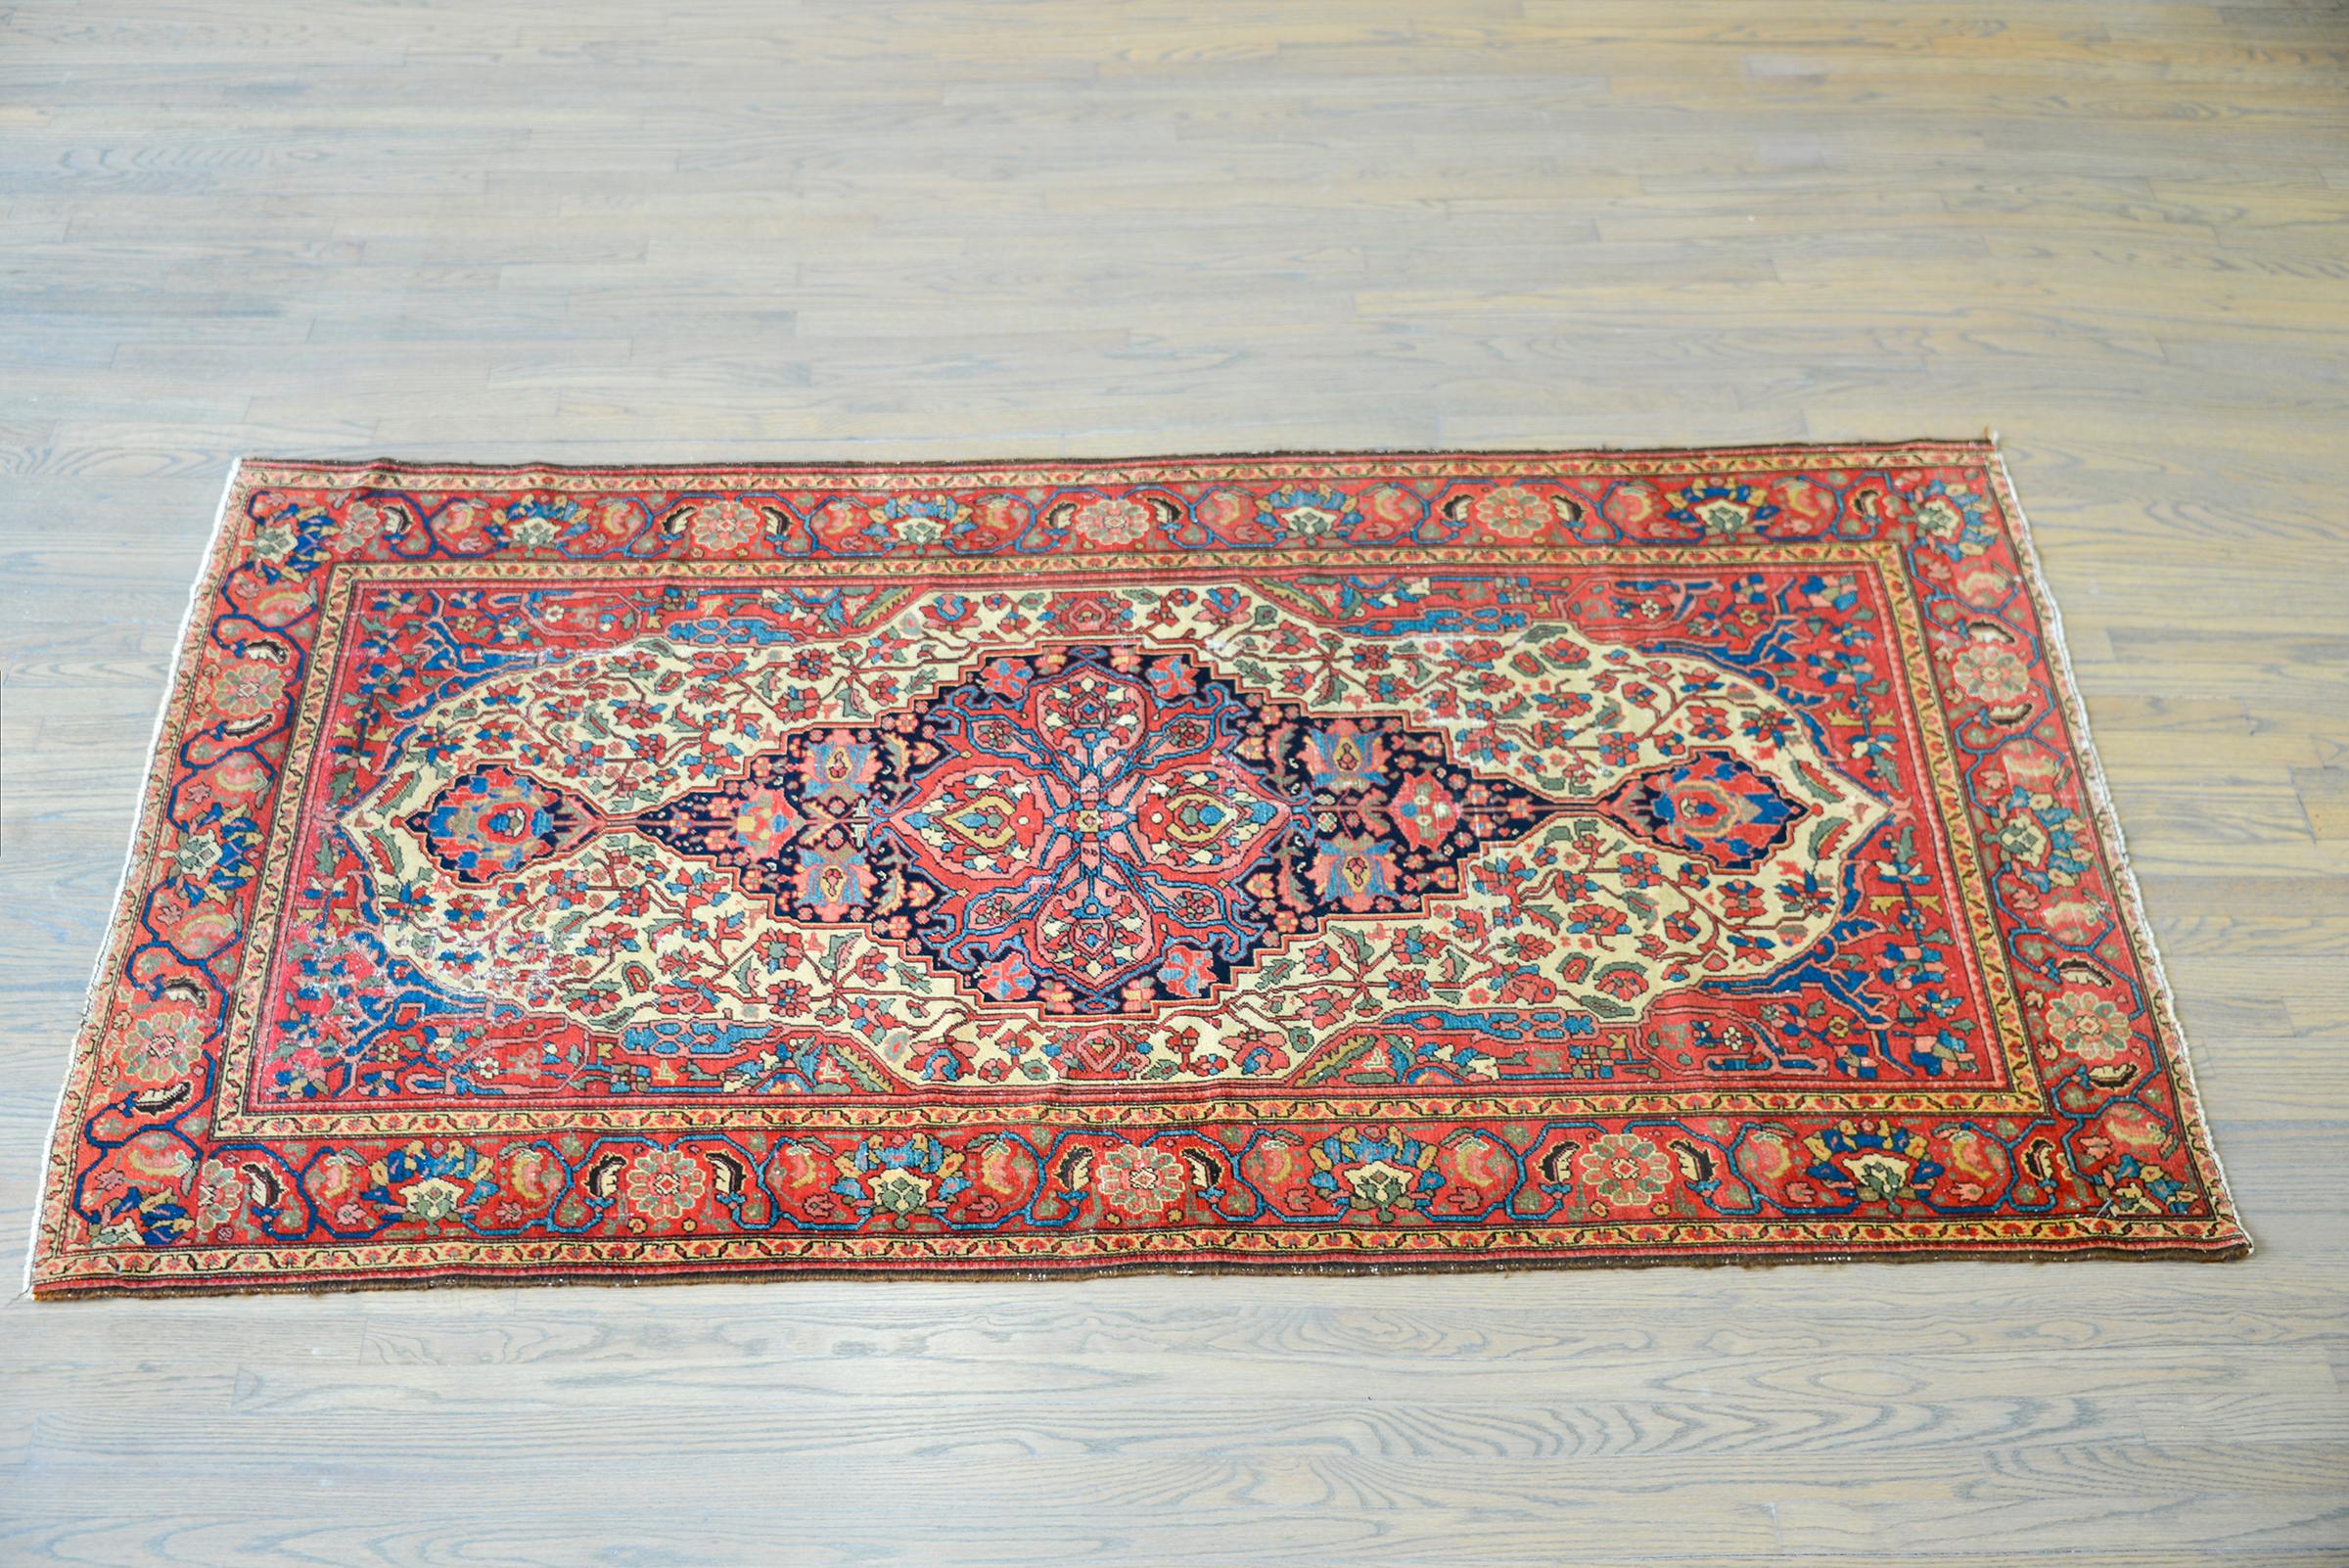 A gorgeous early 20th century Persian Malayer rug with a wonderful central floral medallion woven in brilliant reds, greens, golds, and indigos, set against a dark indigo background. The border is extraordinary with large-scale floral and scrolling